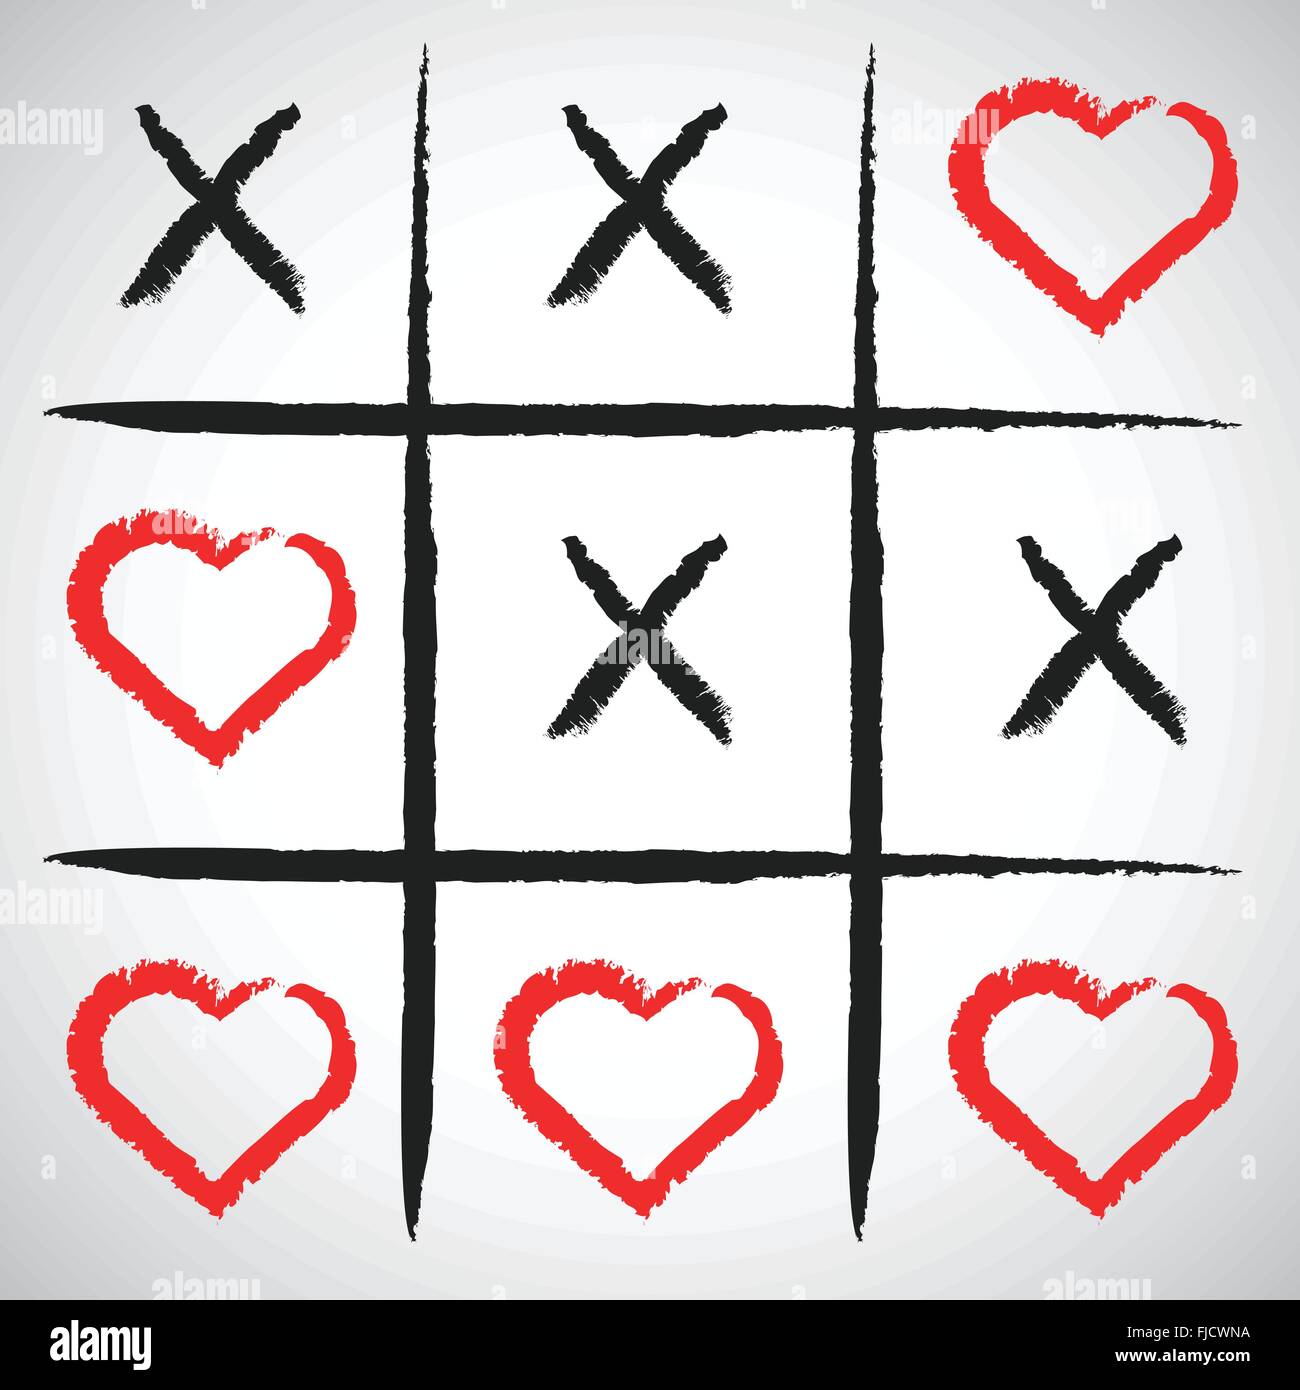 Simple game - X-O game.Hand drawn tic-tac-toe elements.Happy Valentines day symbol.Vector illustration Stock Vector